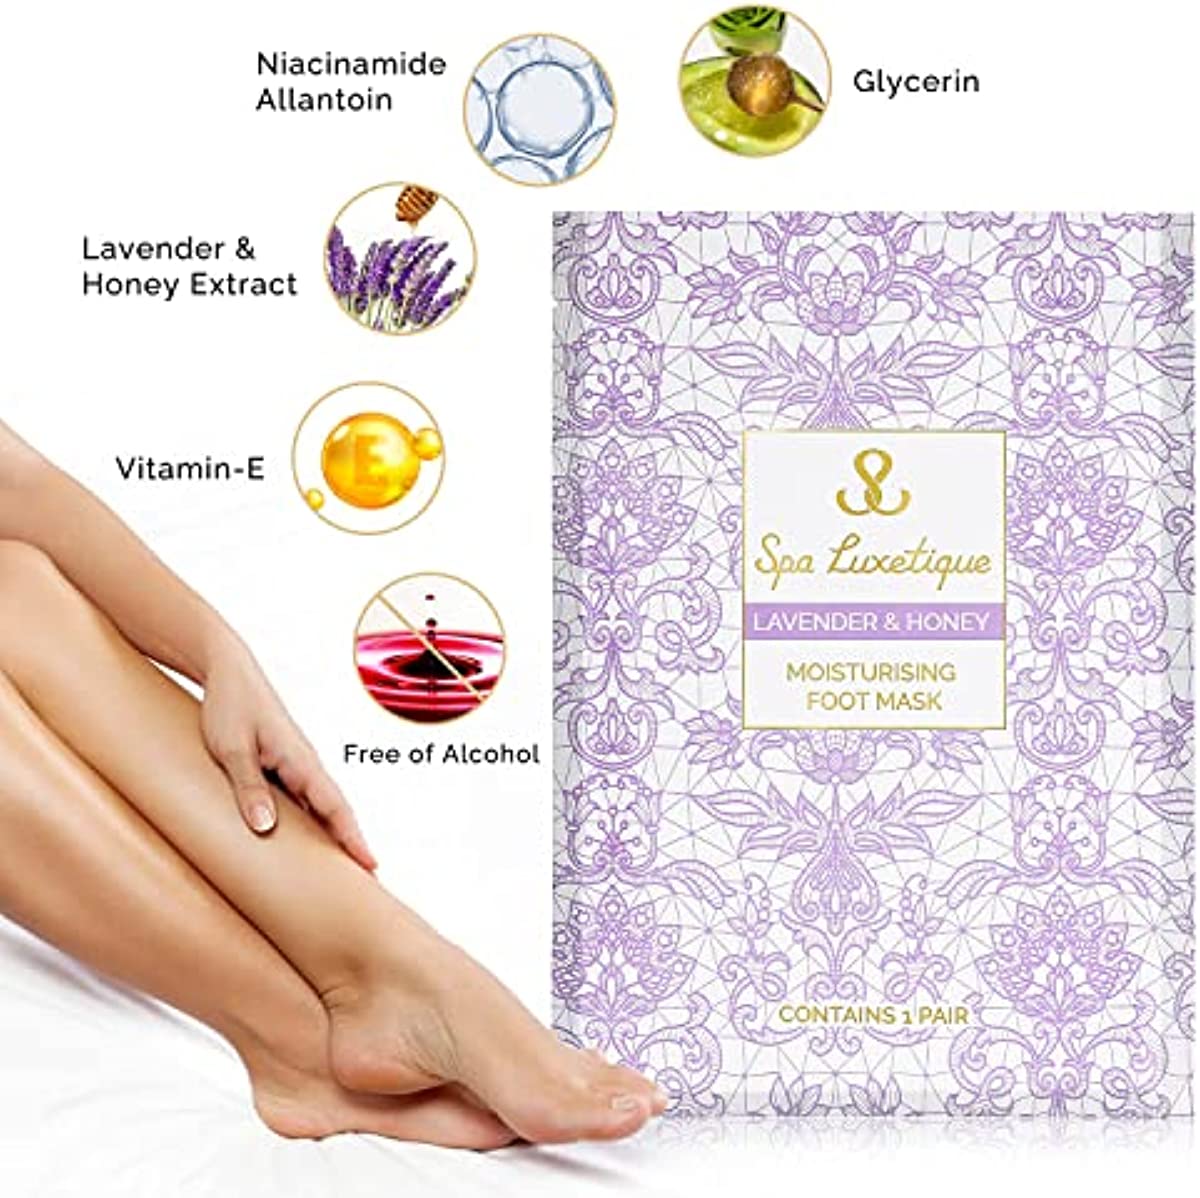 Foot Mask - 5 Pairs Lavender & Honey Foot Spa for Rough Dry Cracked Feet Reduce Dead Skin, Moisturizing Socks for Baby Foot, Relaxing Soft Feet Treatment for Women & Men, Fathers Day Foot Care Gifts